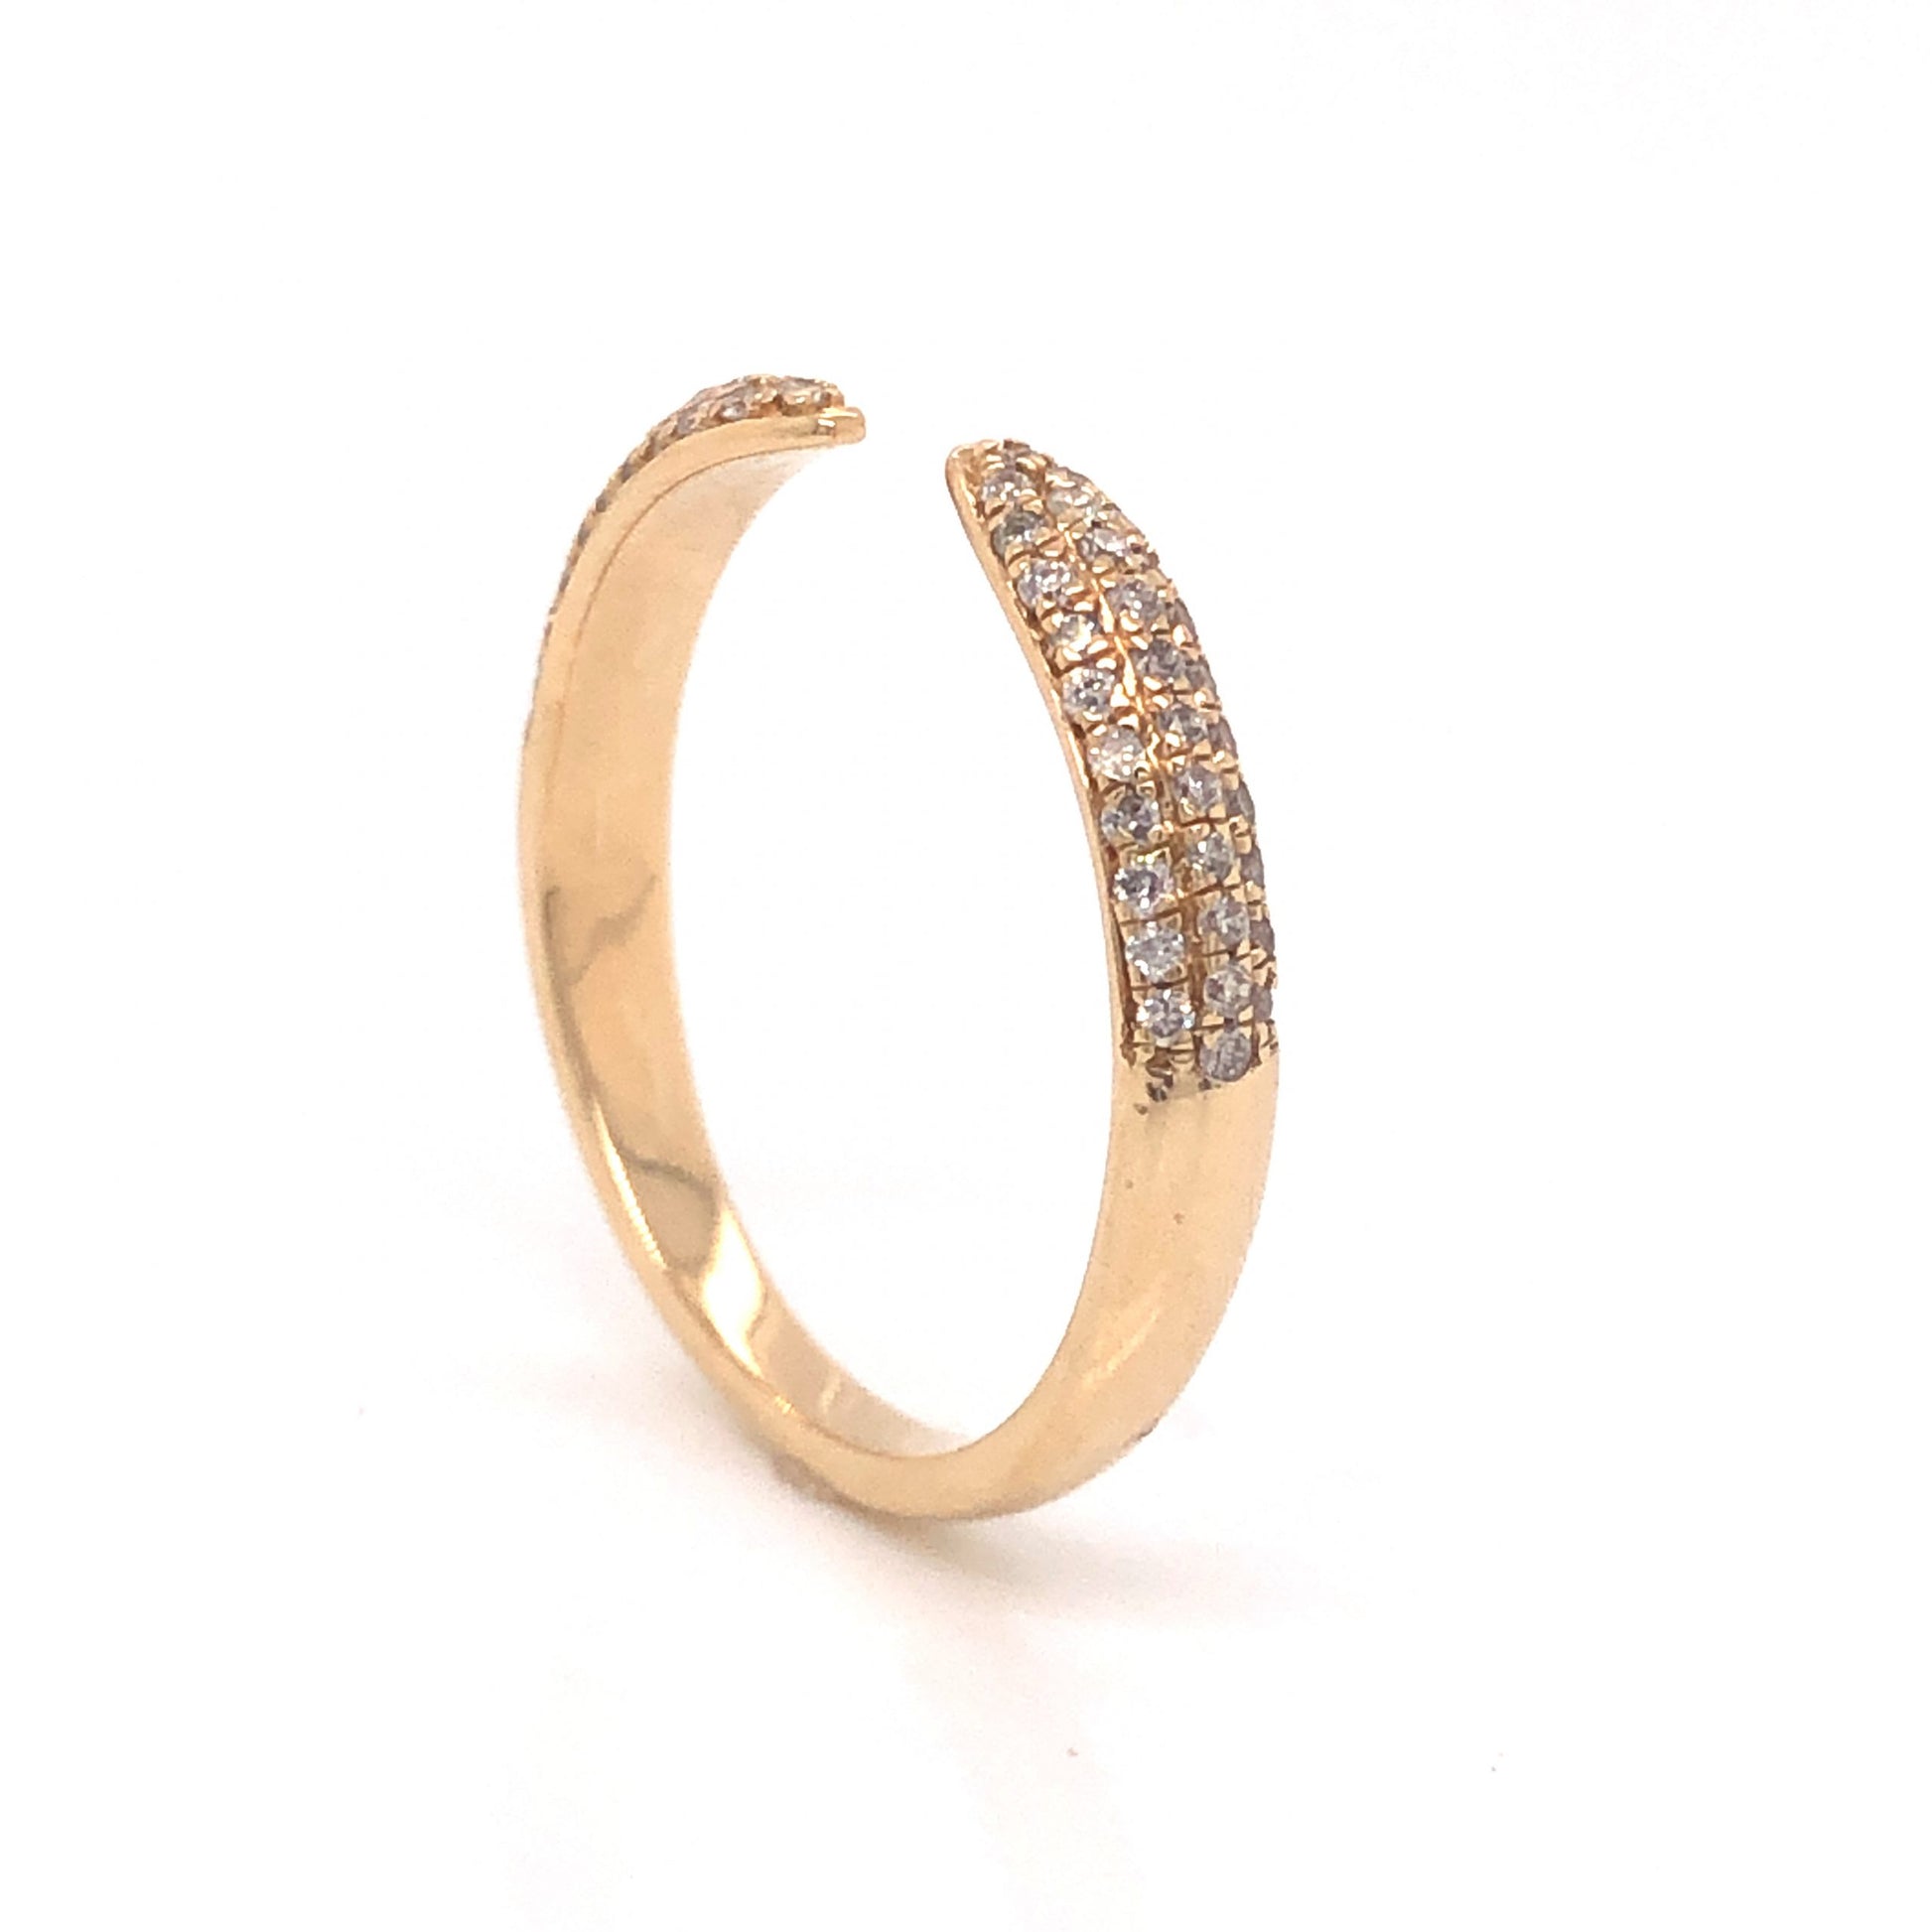 Open Pave Diamond Stacking Ring in 14k Yellow GoldComposition: 14 Karat Yellow Gold Ring Size: 8 Total Diamond Weight: .25ct Total Gram Weight: 2.2 g Inscription: 62/0.25 14k
      